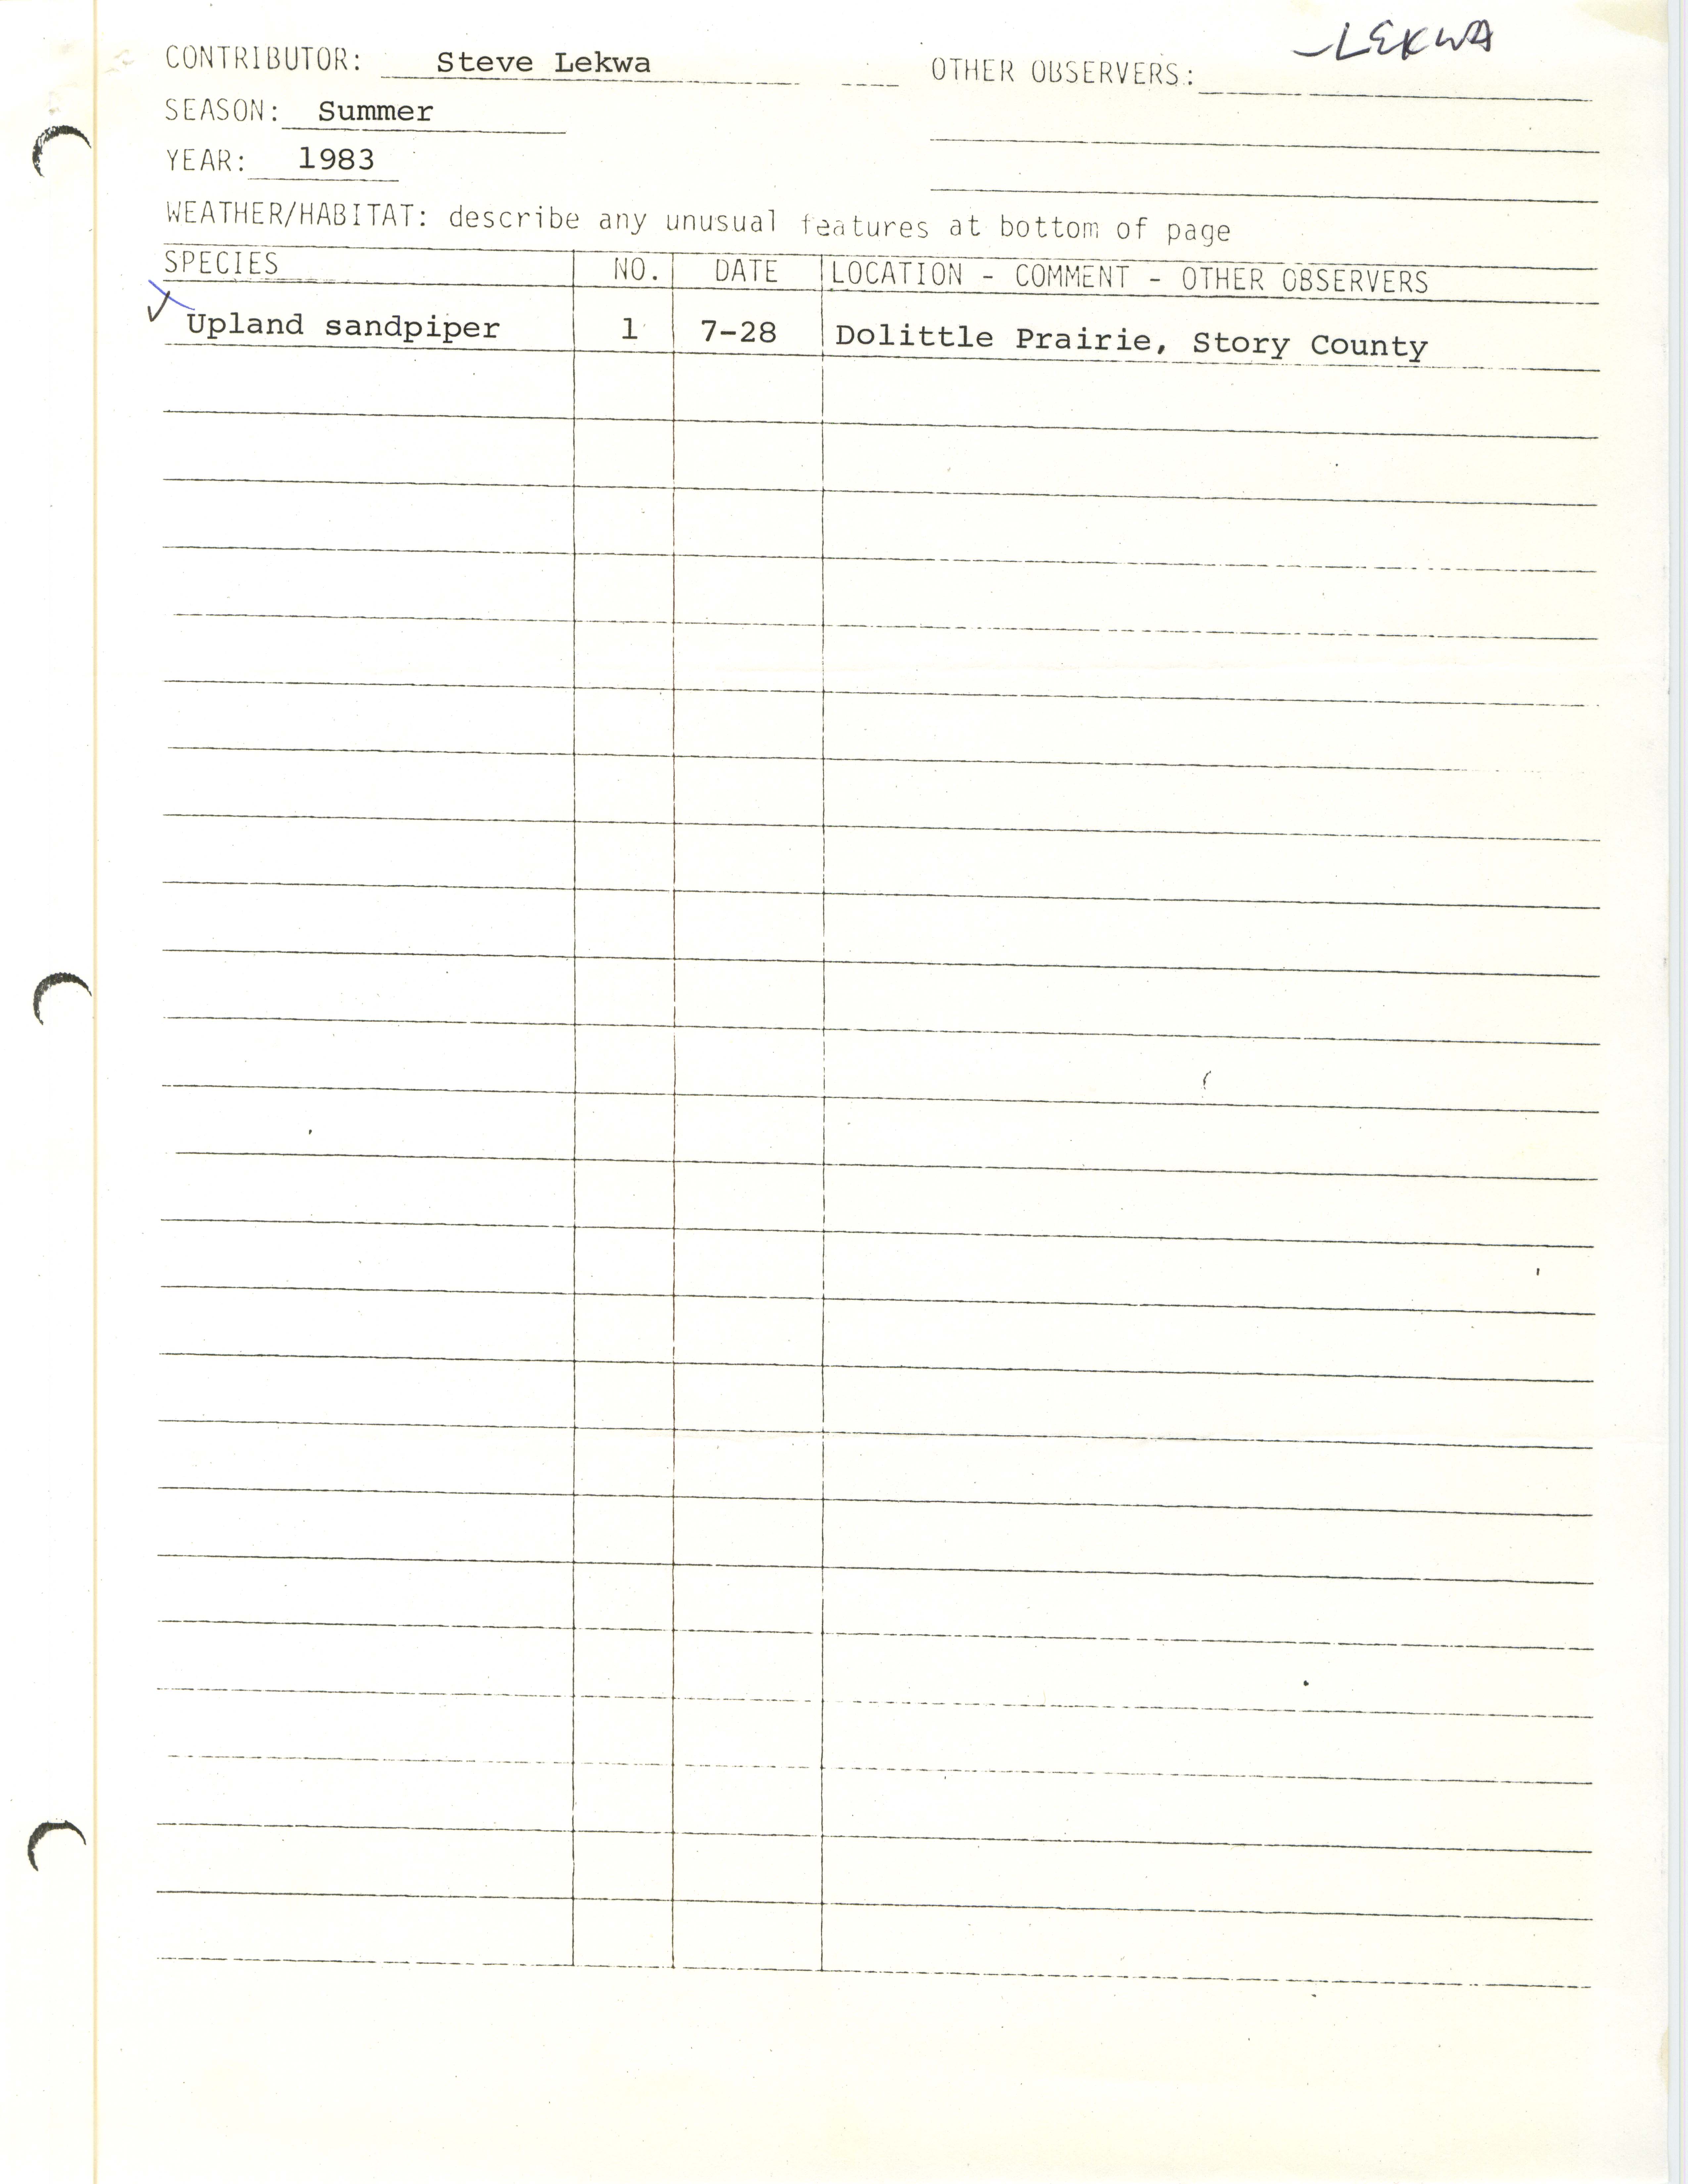 Annotated bird sighting list for Summer 1983 compiled by Steve Lekwa